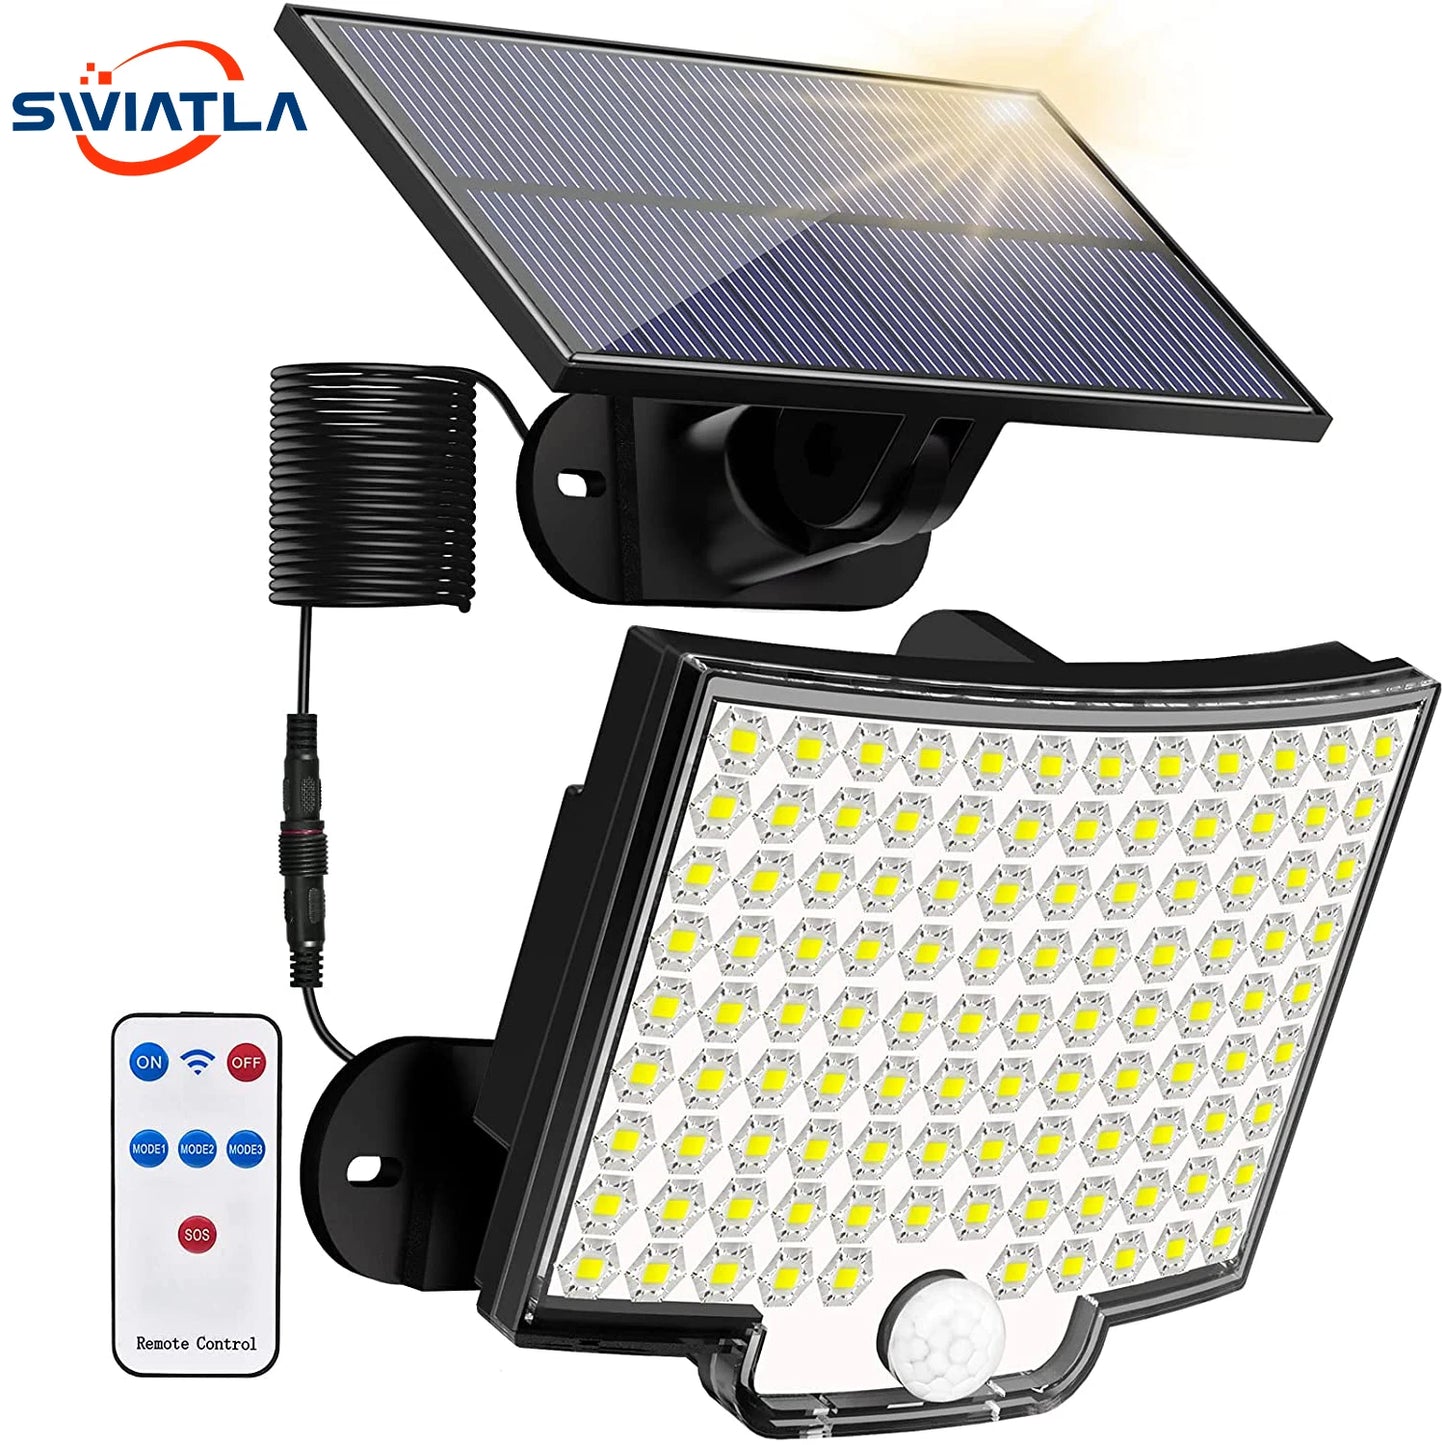 Super Bright Motion Sensor Solar Strong Power LED Light with 4 Working Modes